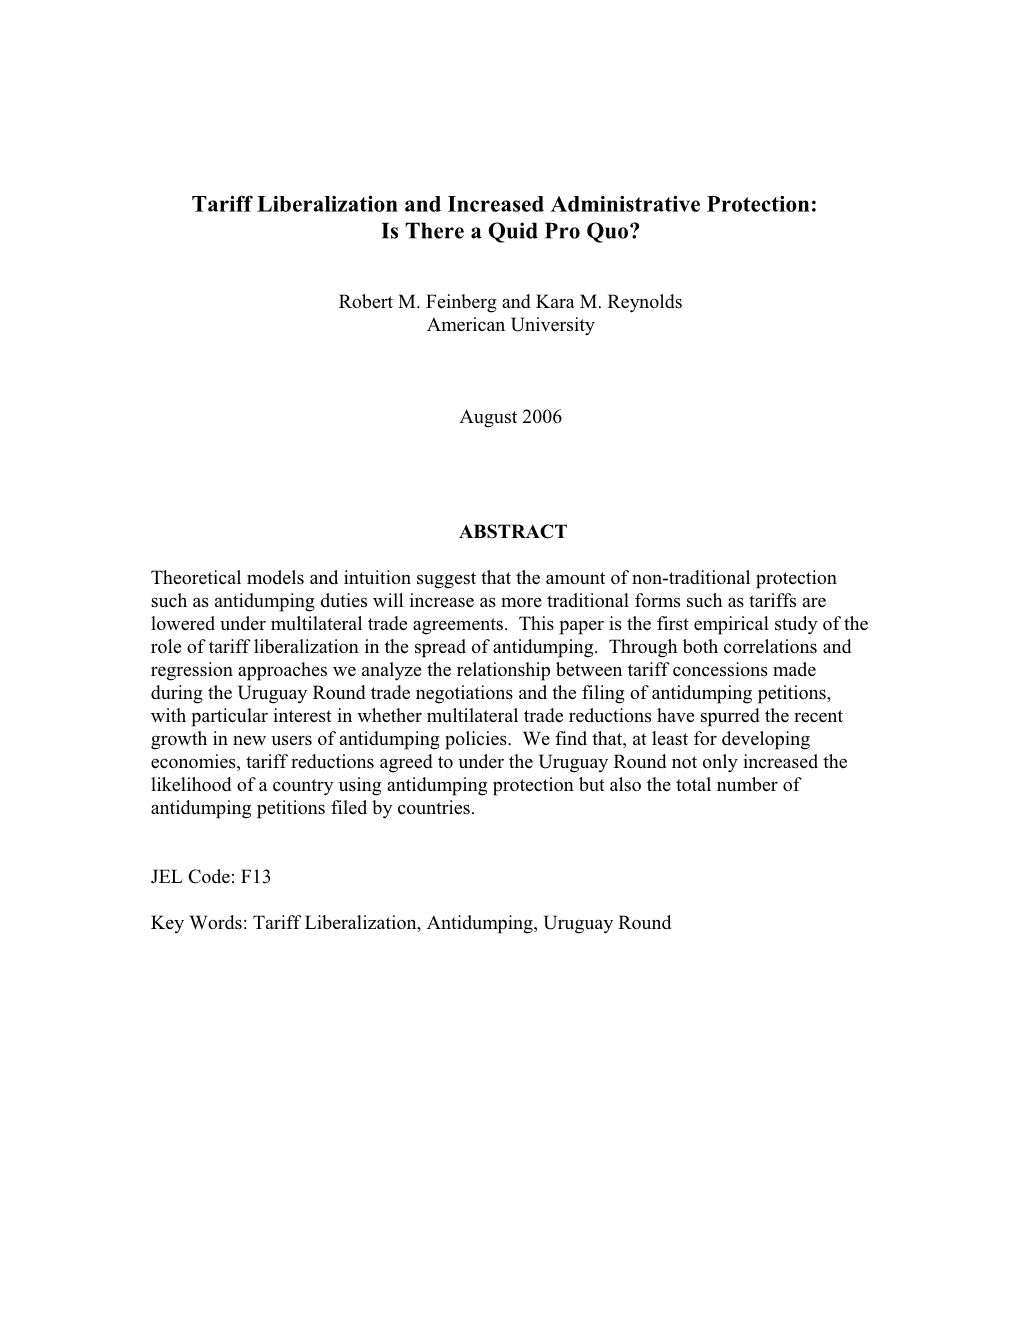 Tariff Liberalization and Increased Administrative Protection: Is There A